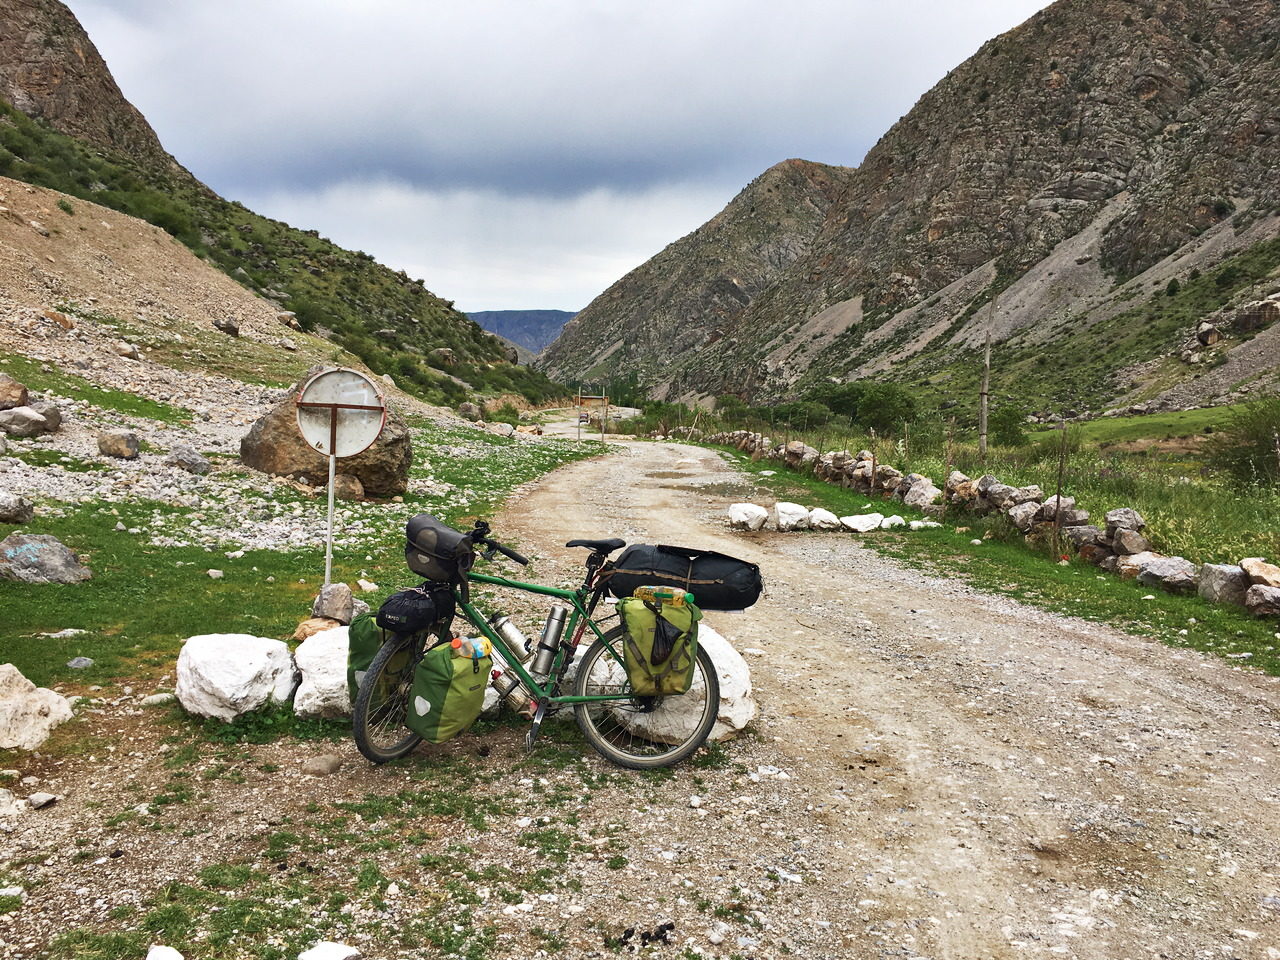 Couldn't continue at a Kyrgyz checkpoint